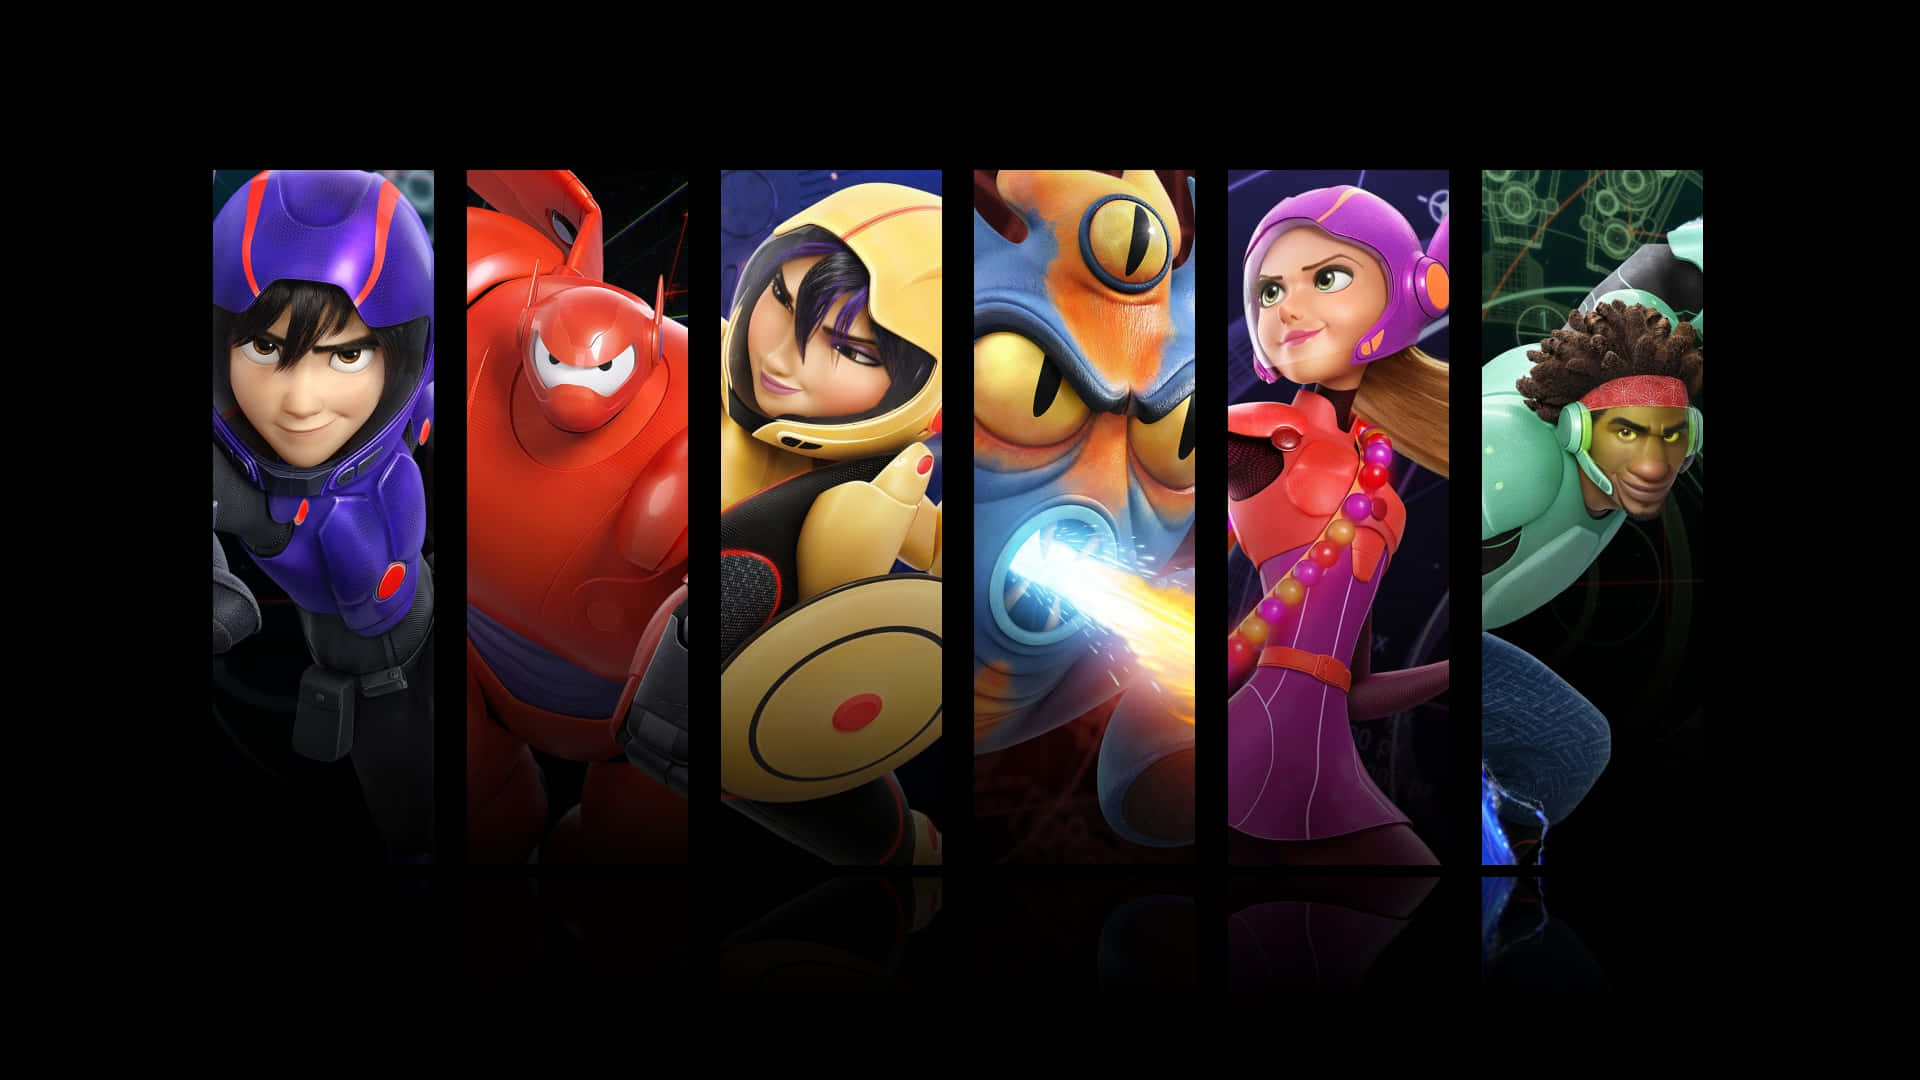 Big Hero 6 showing off their superpowers!